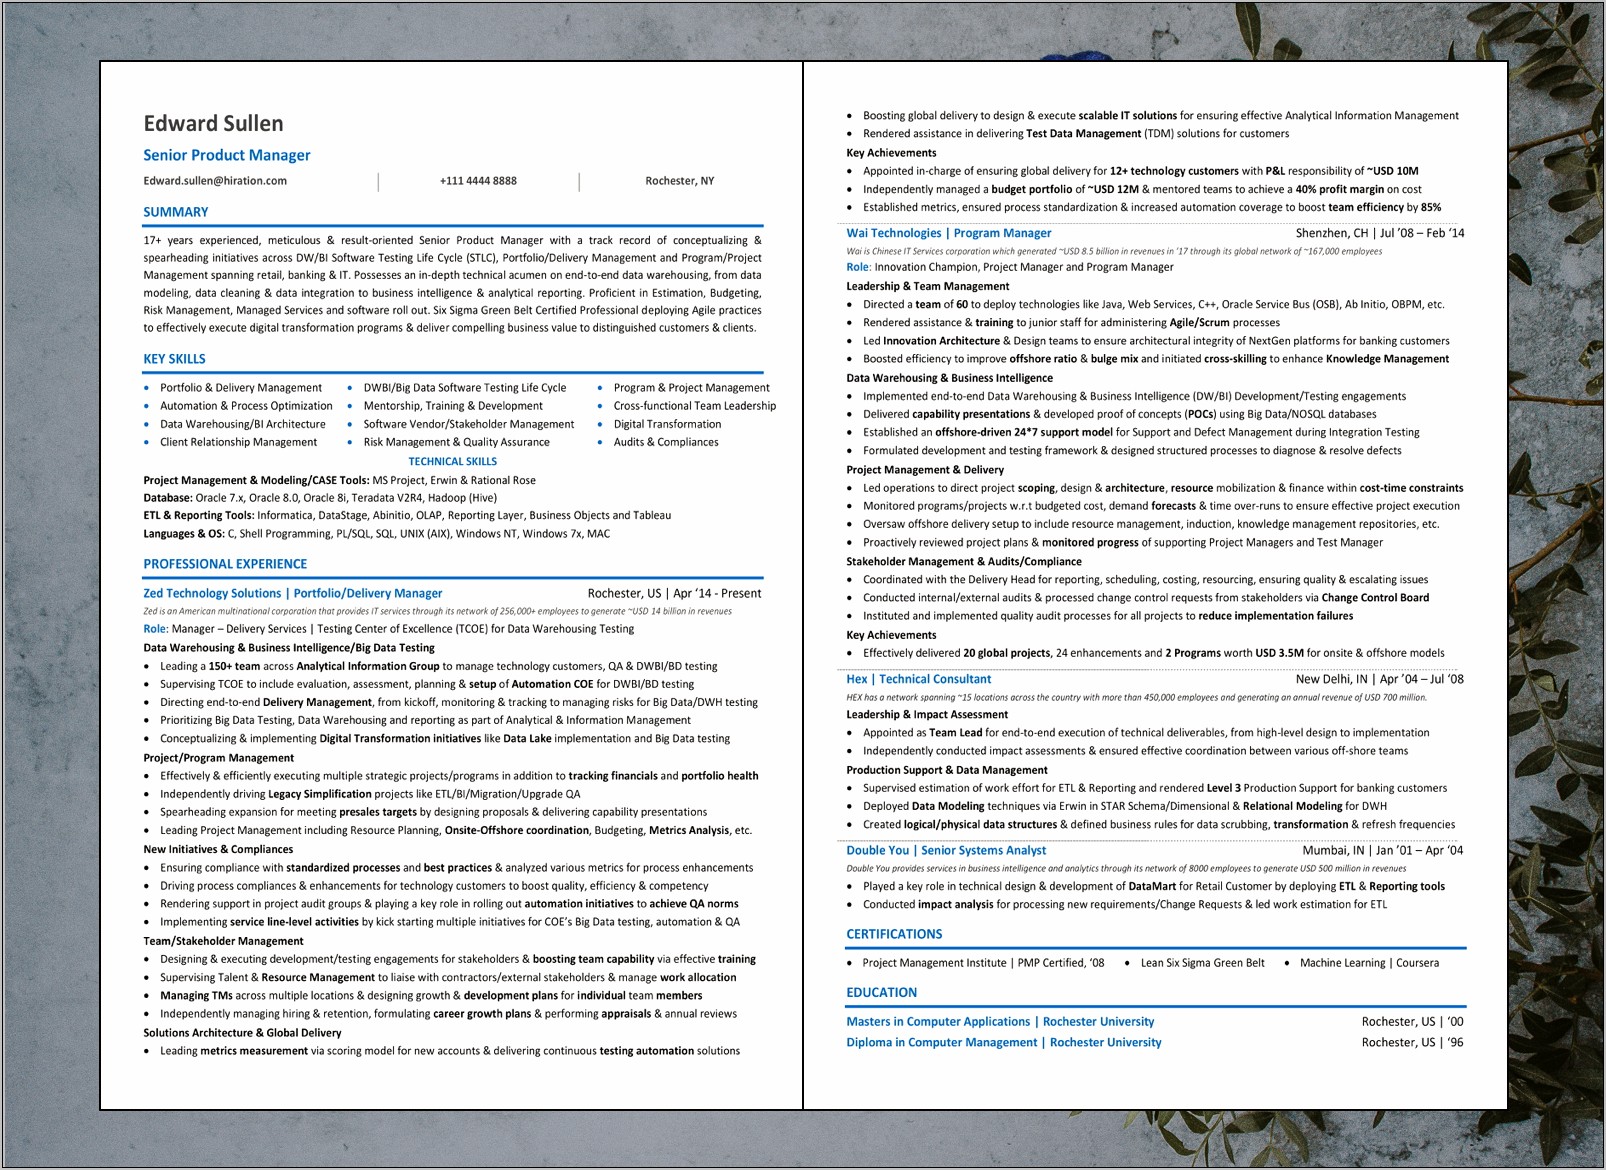 Example Resume For Experienced Professional Product Manager